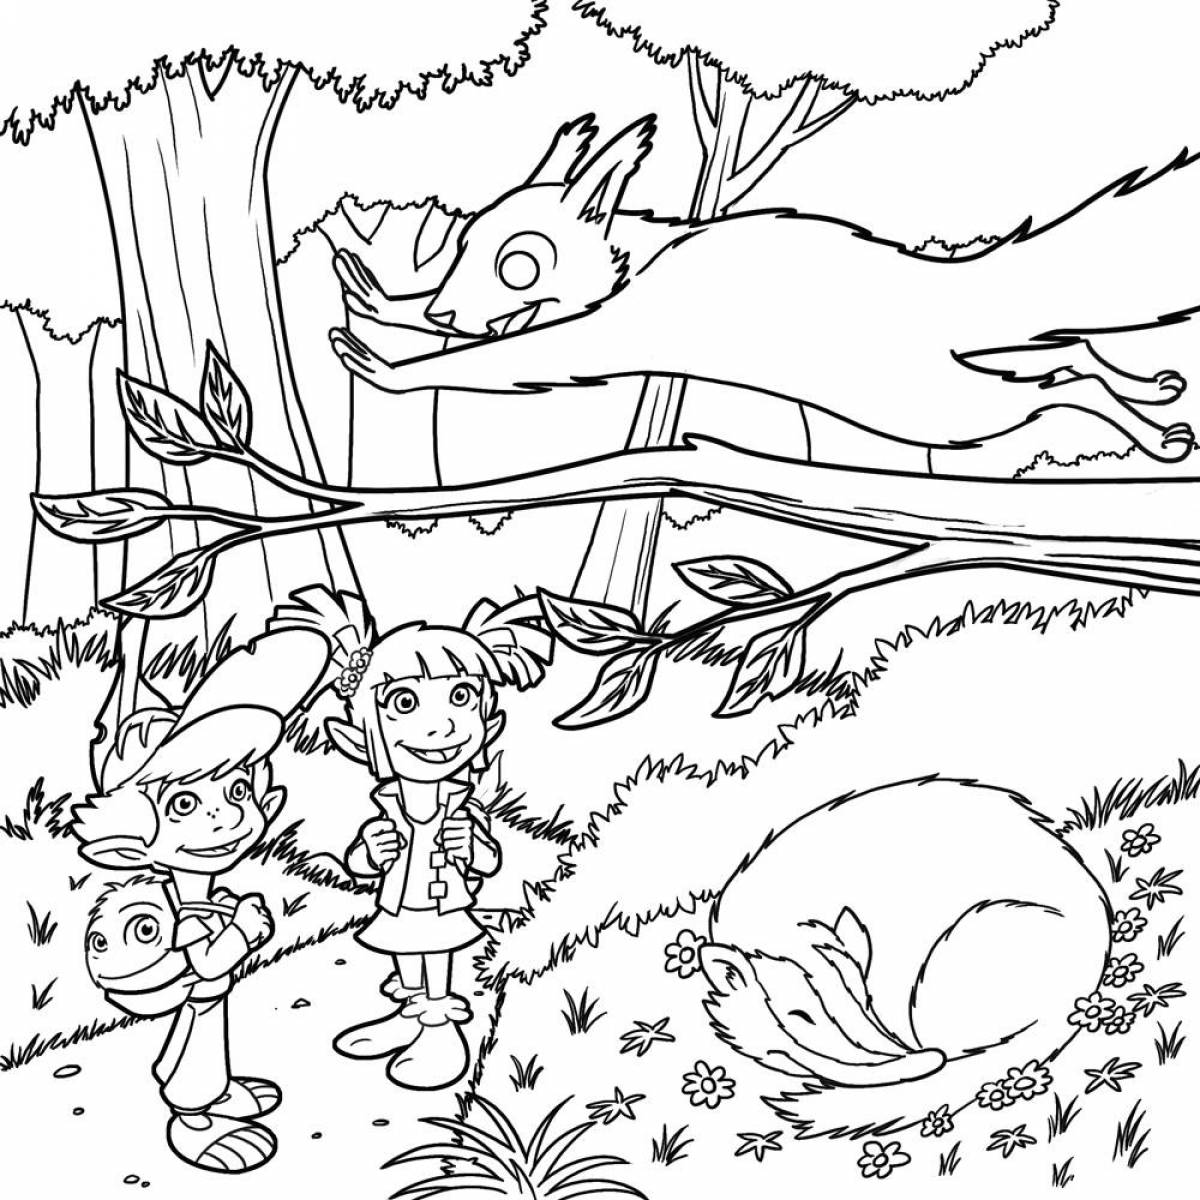 Colorful children's coloring page edge